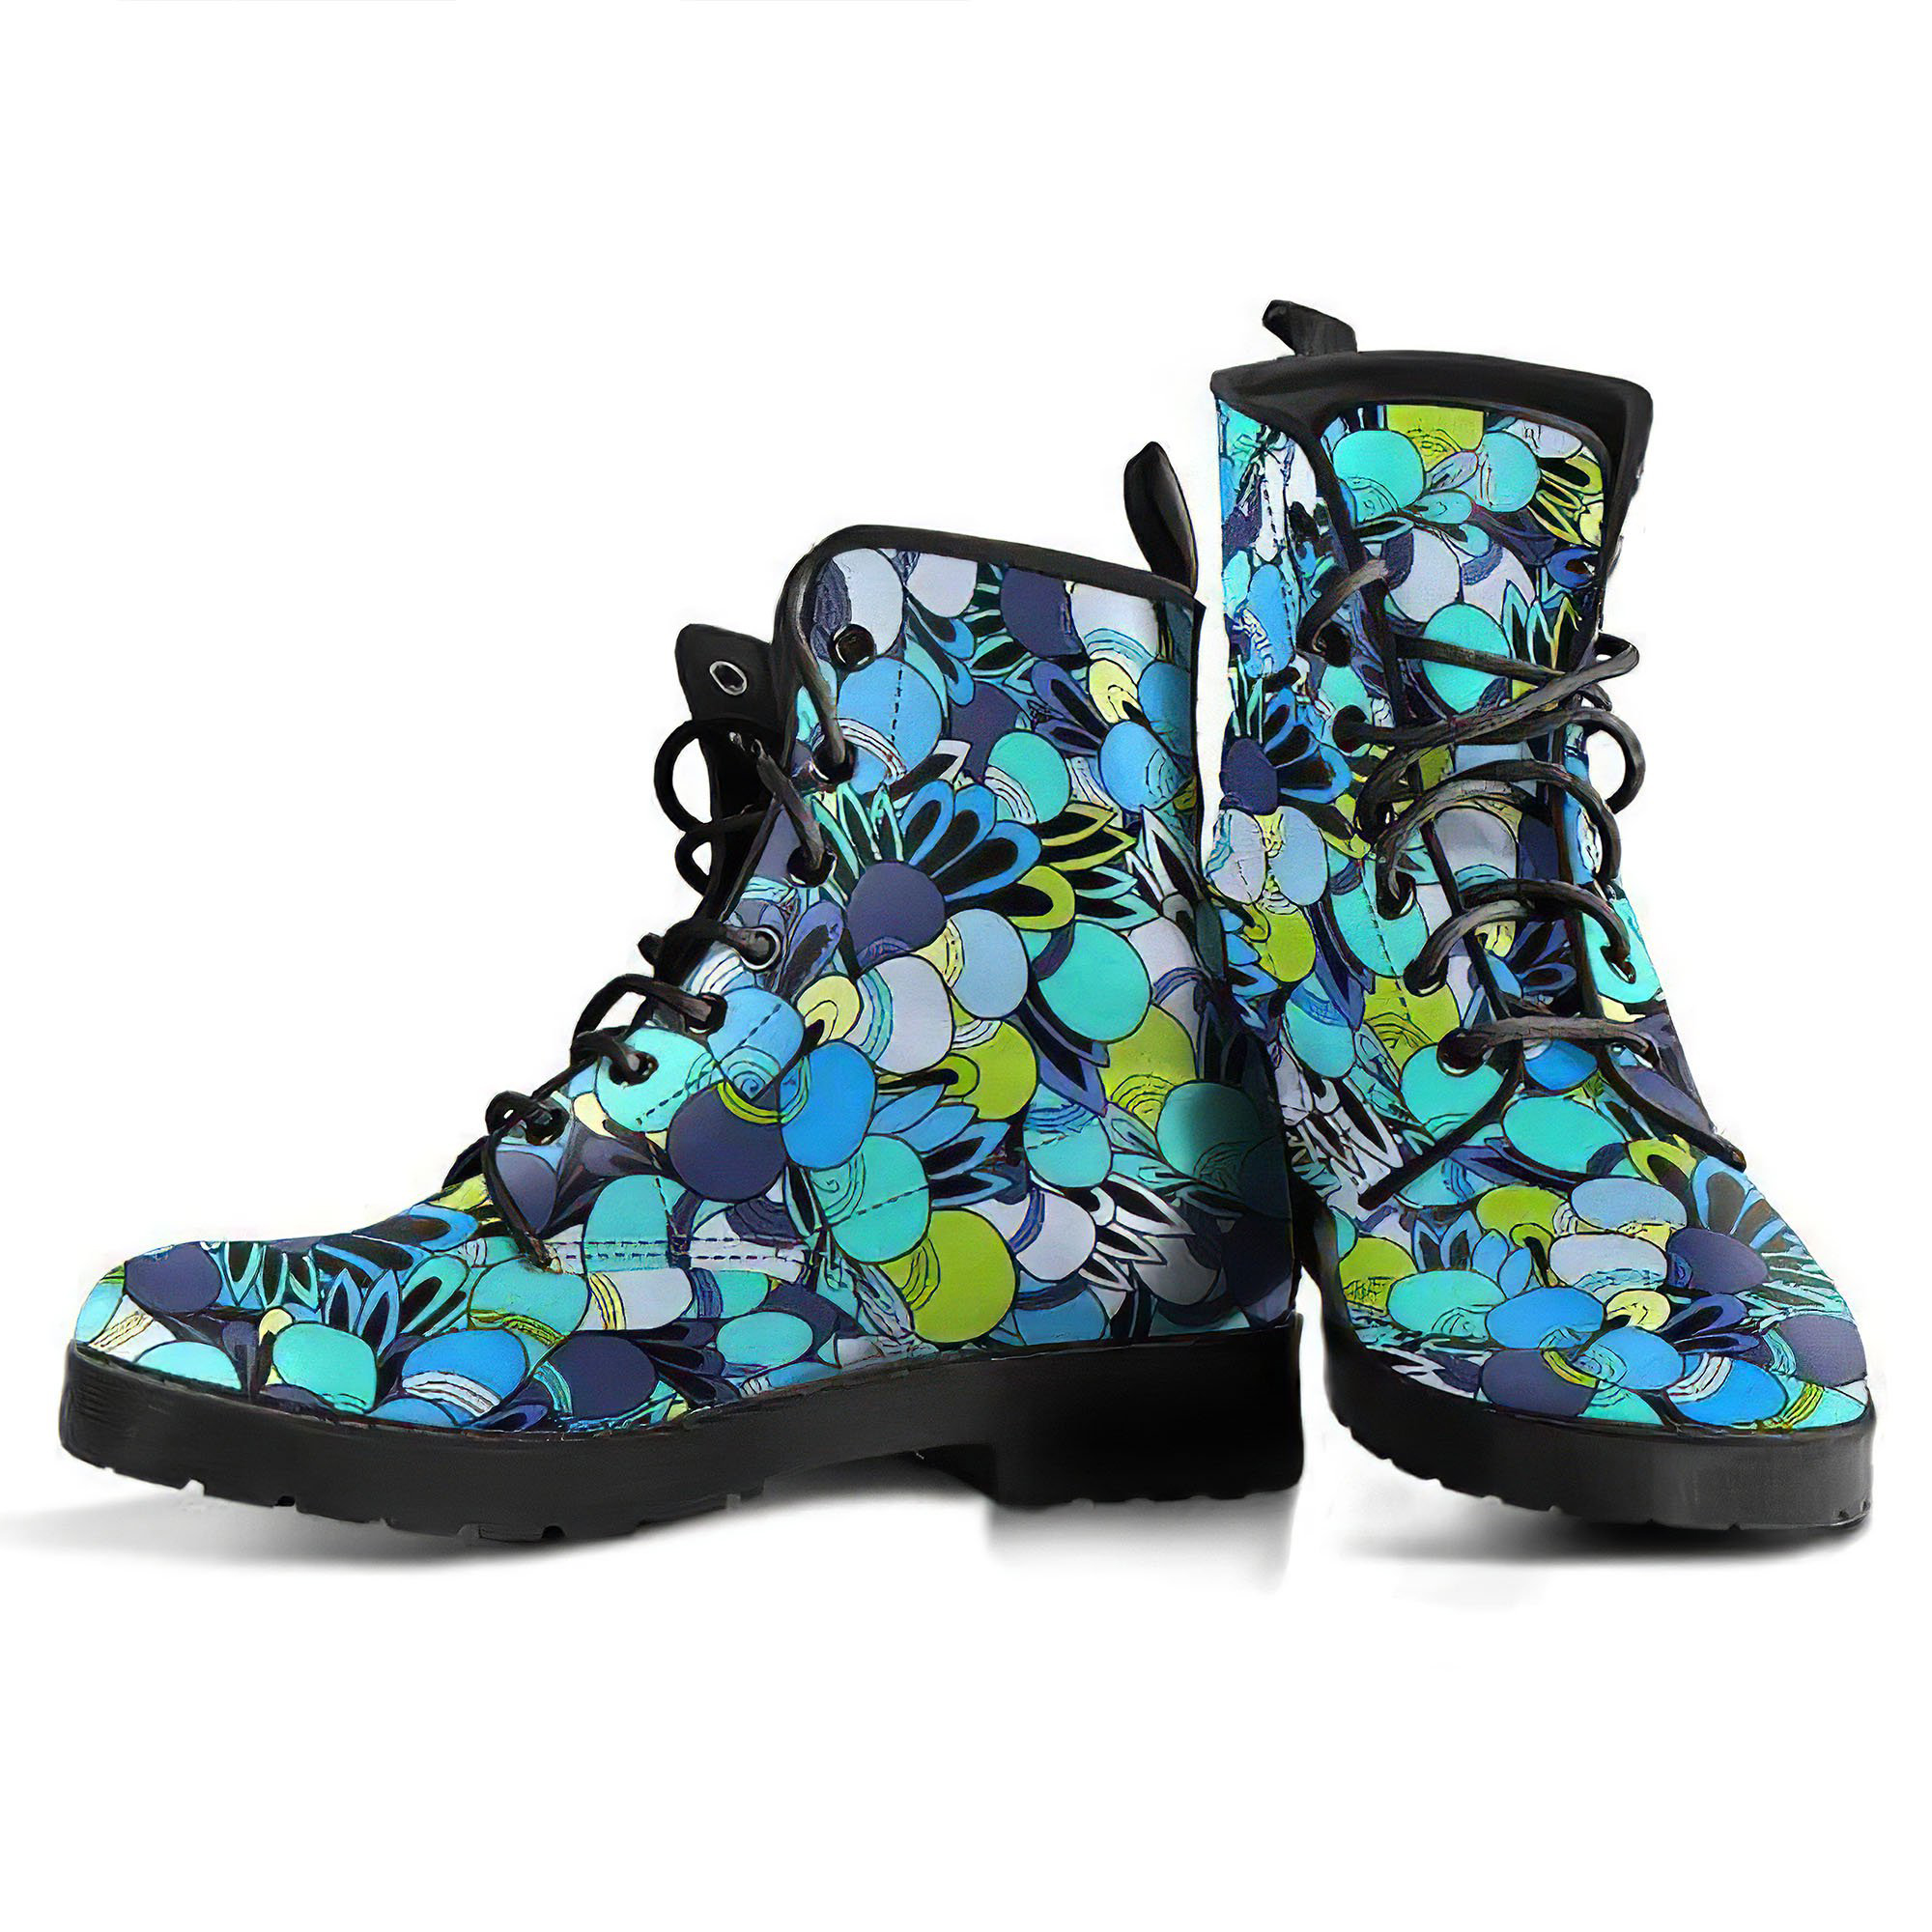 funky-patterns-in-blues-leather-boots-for-women-gp-main.jpg